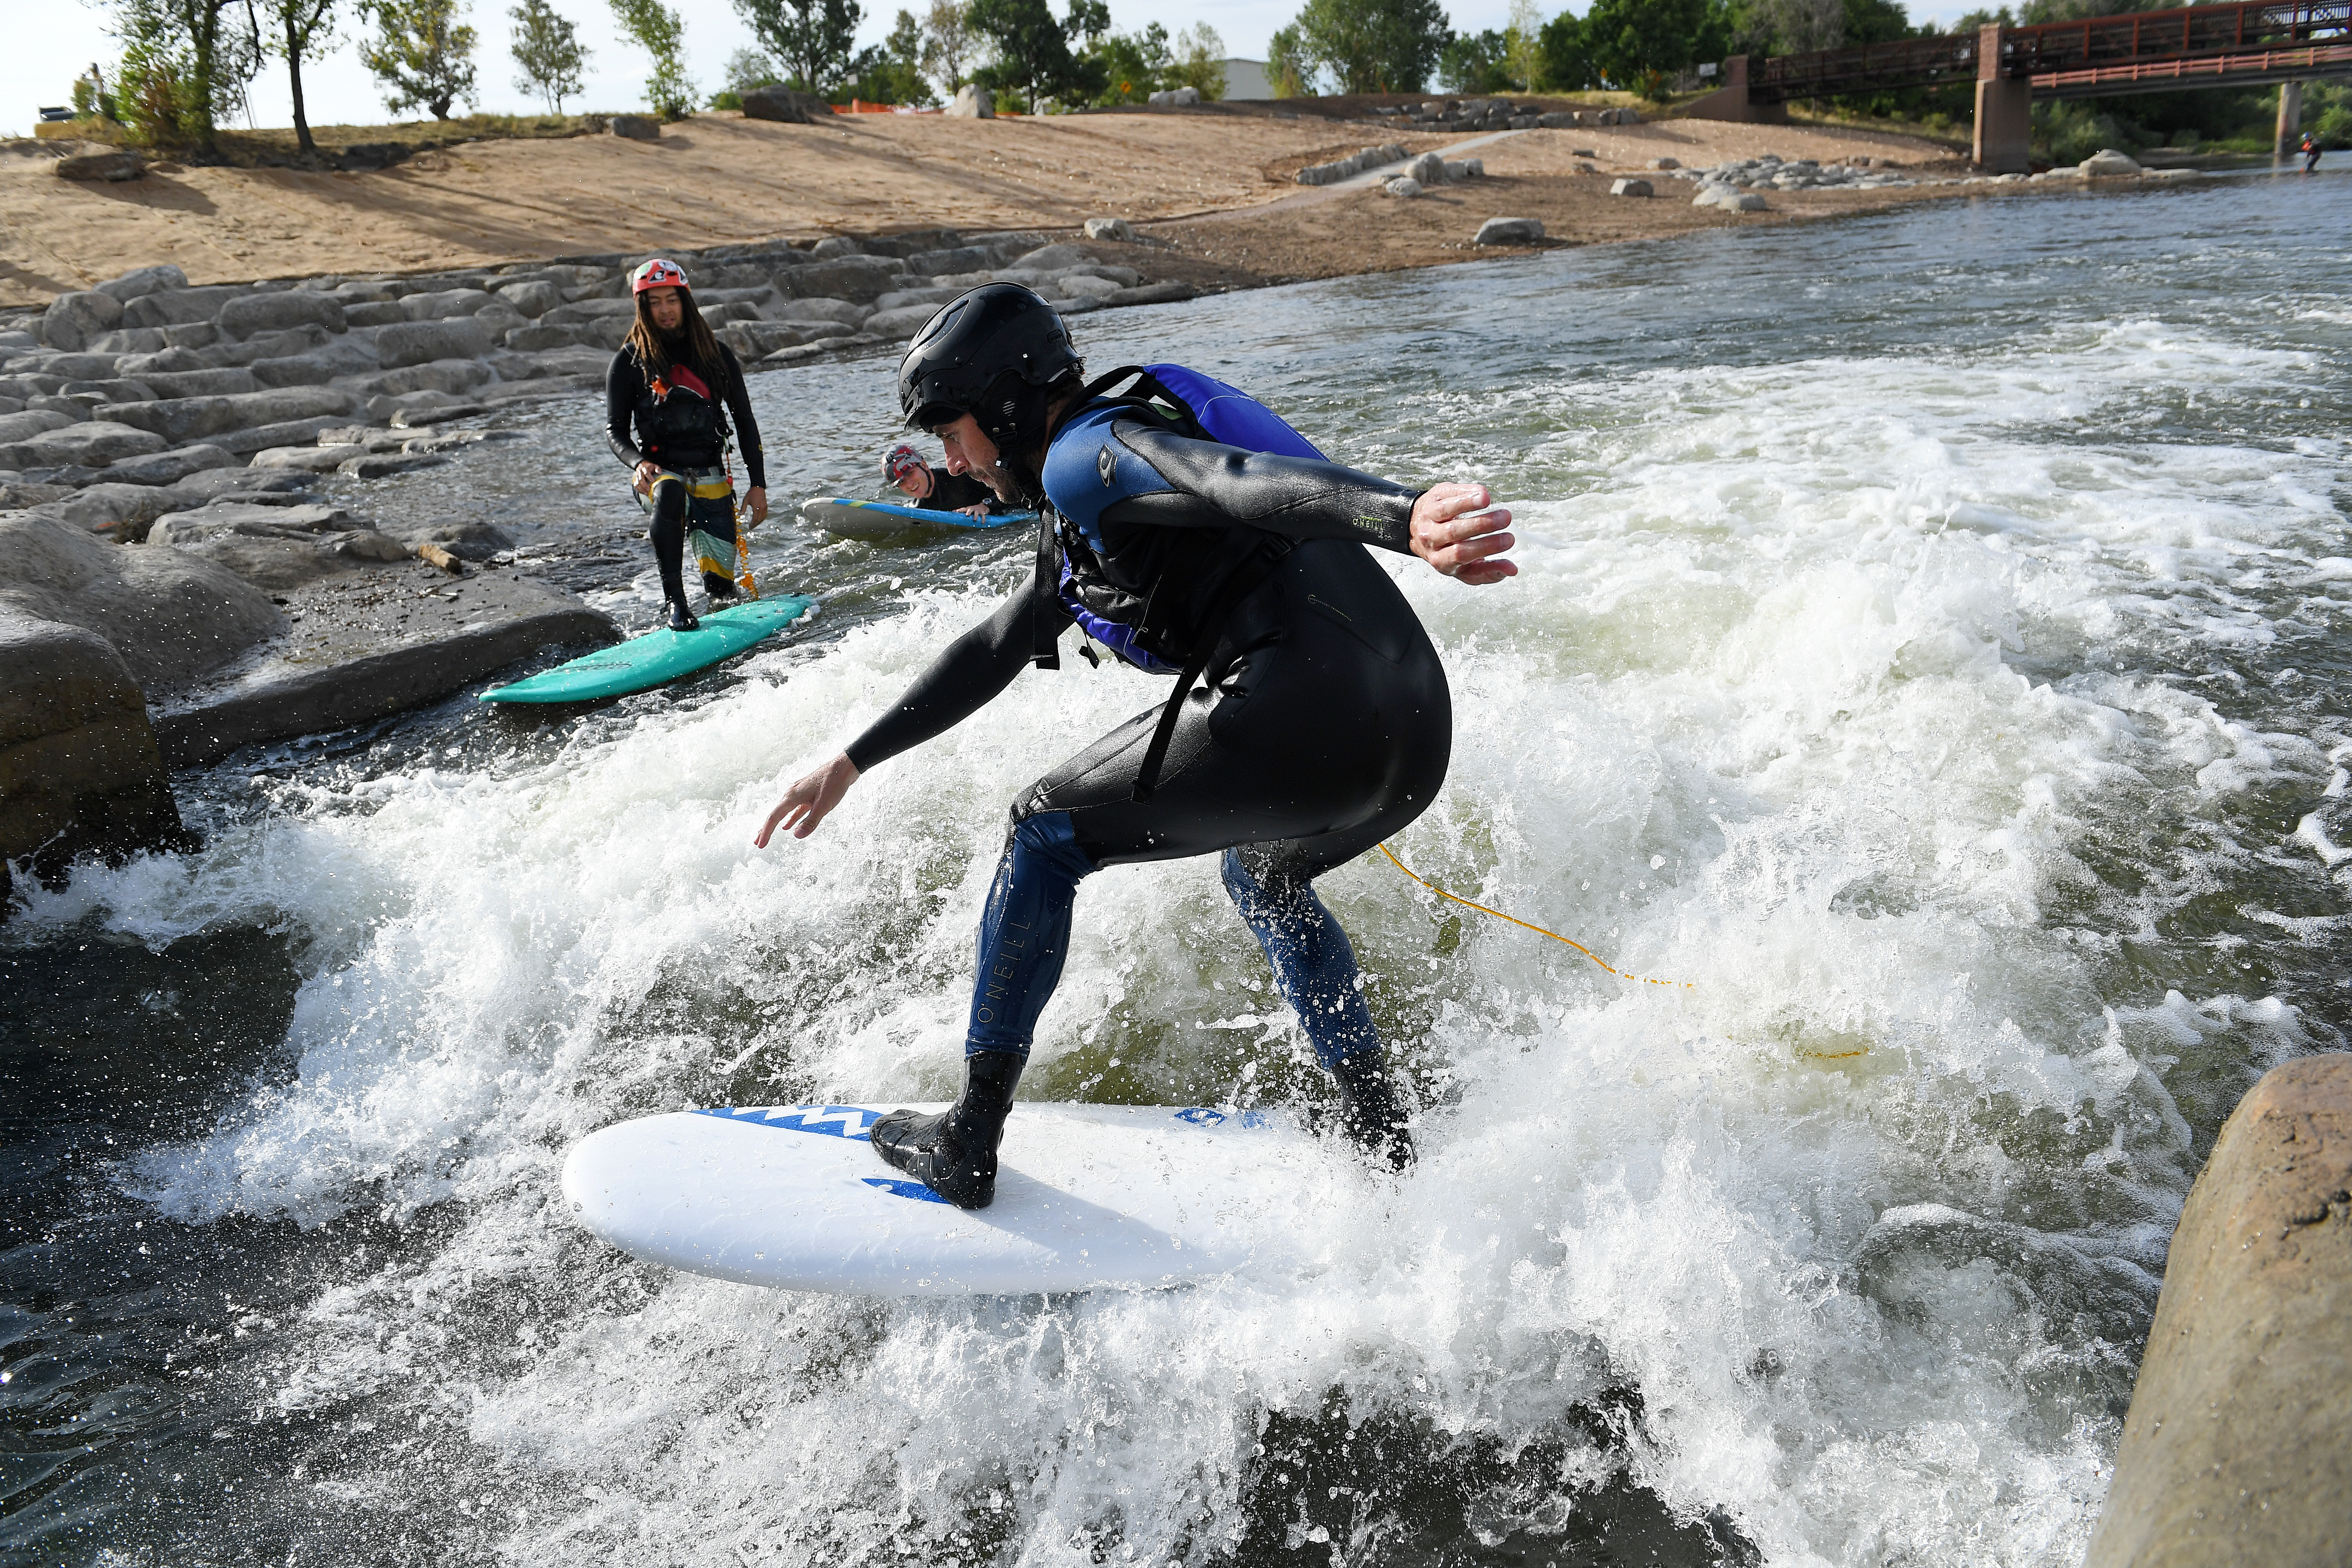 A new park is making surfing just outside Denver possible